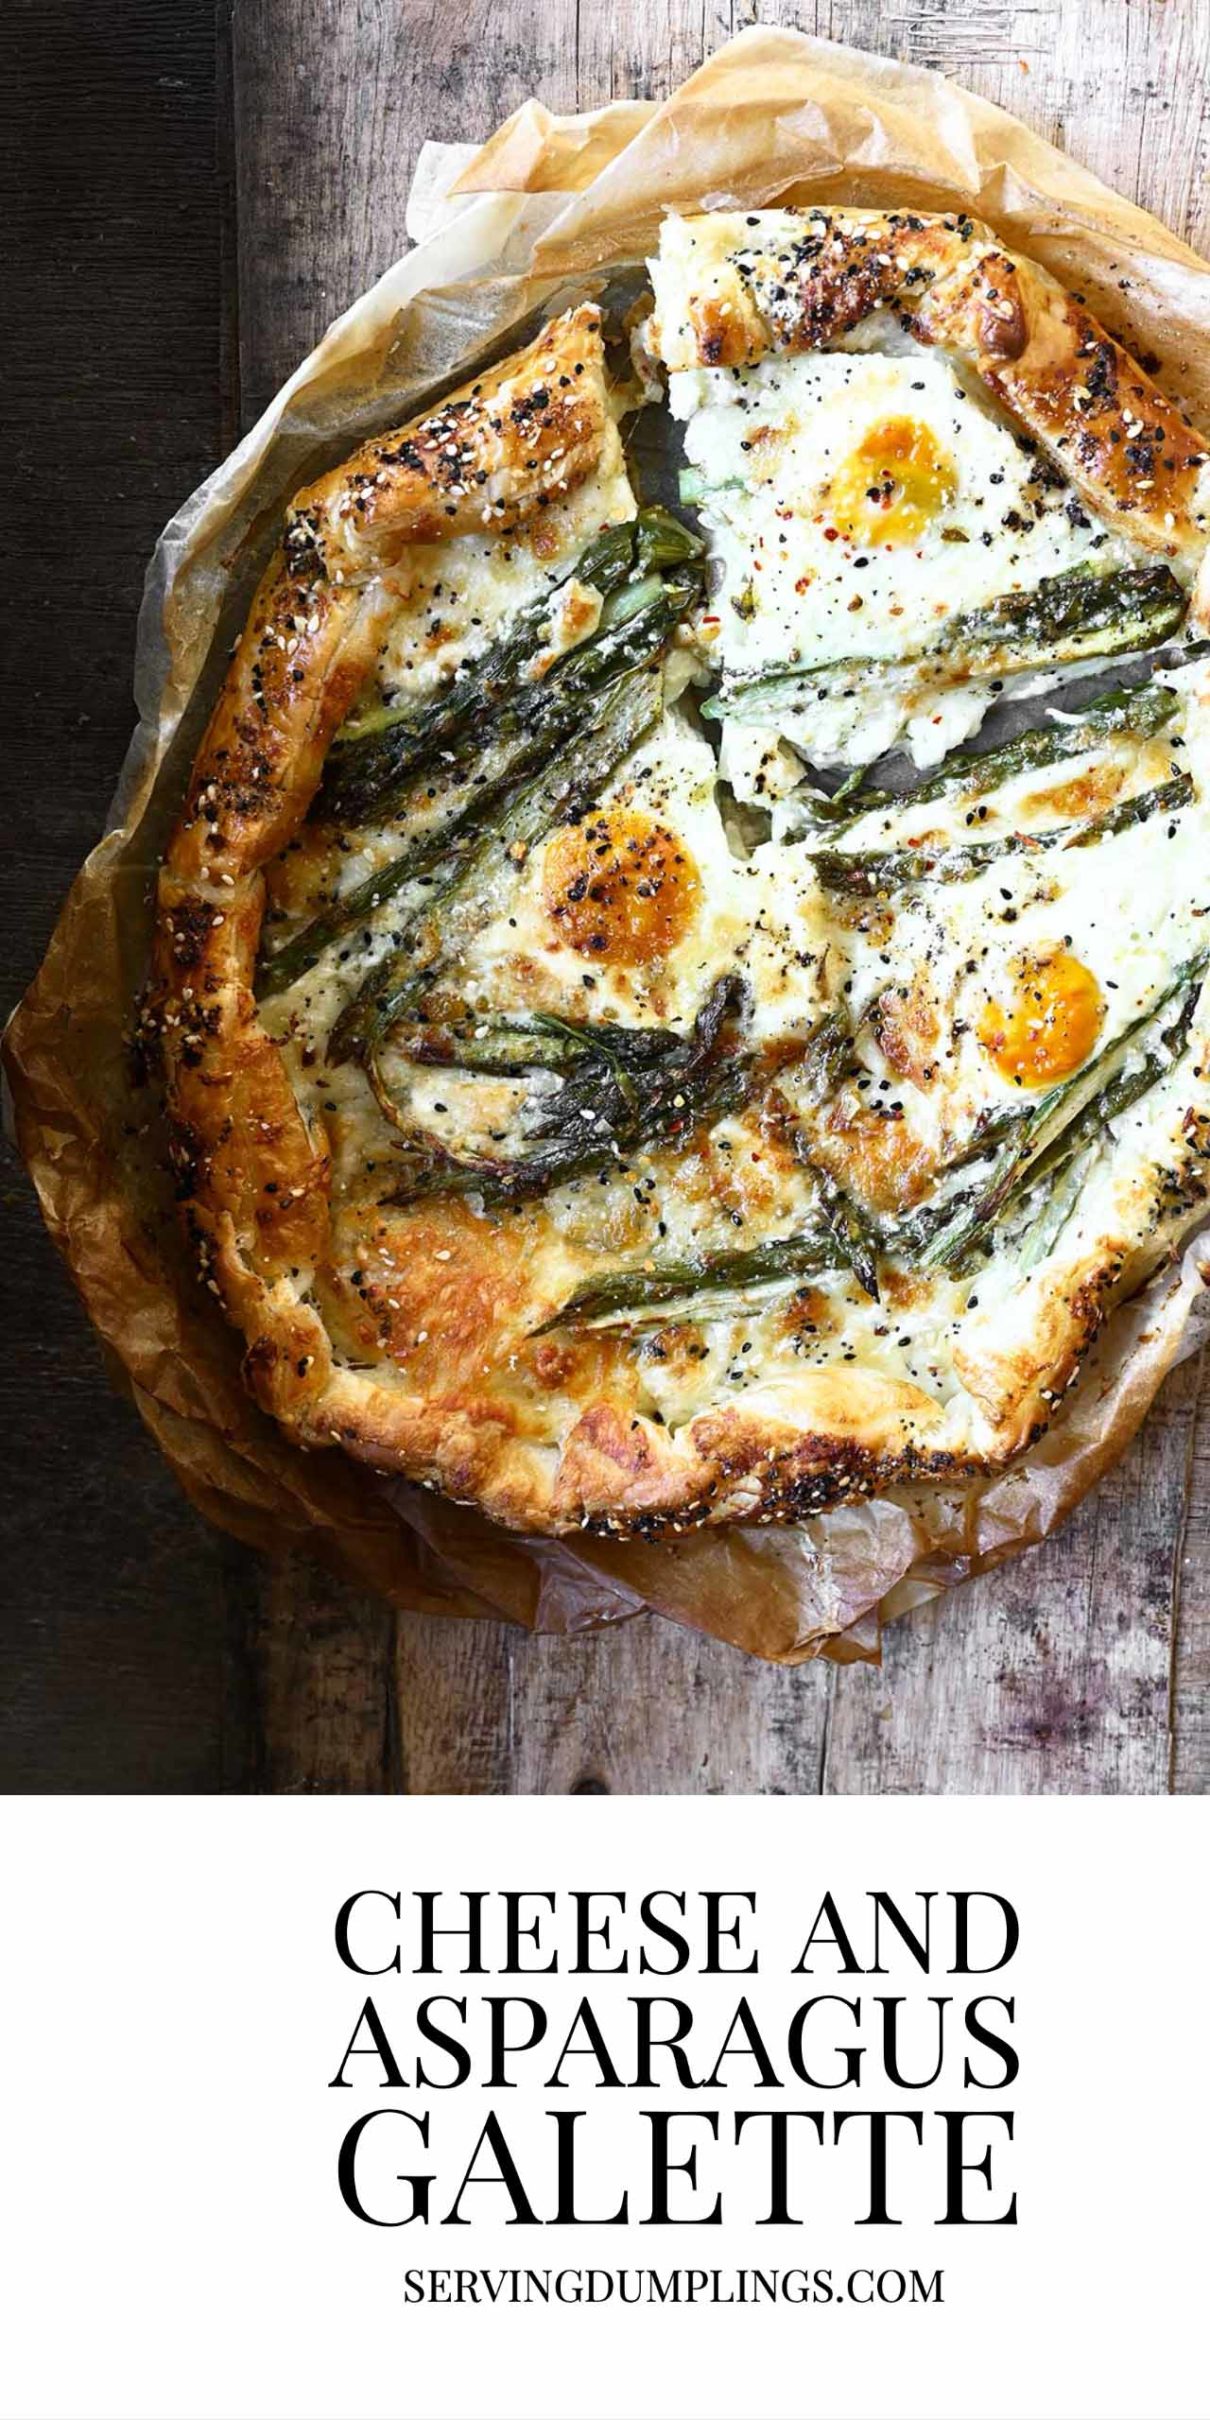 Cheese and Asparagus Galette - Serving Dumplings